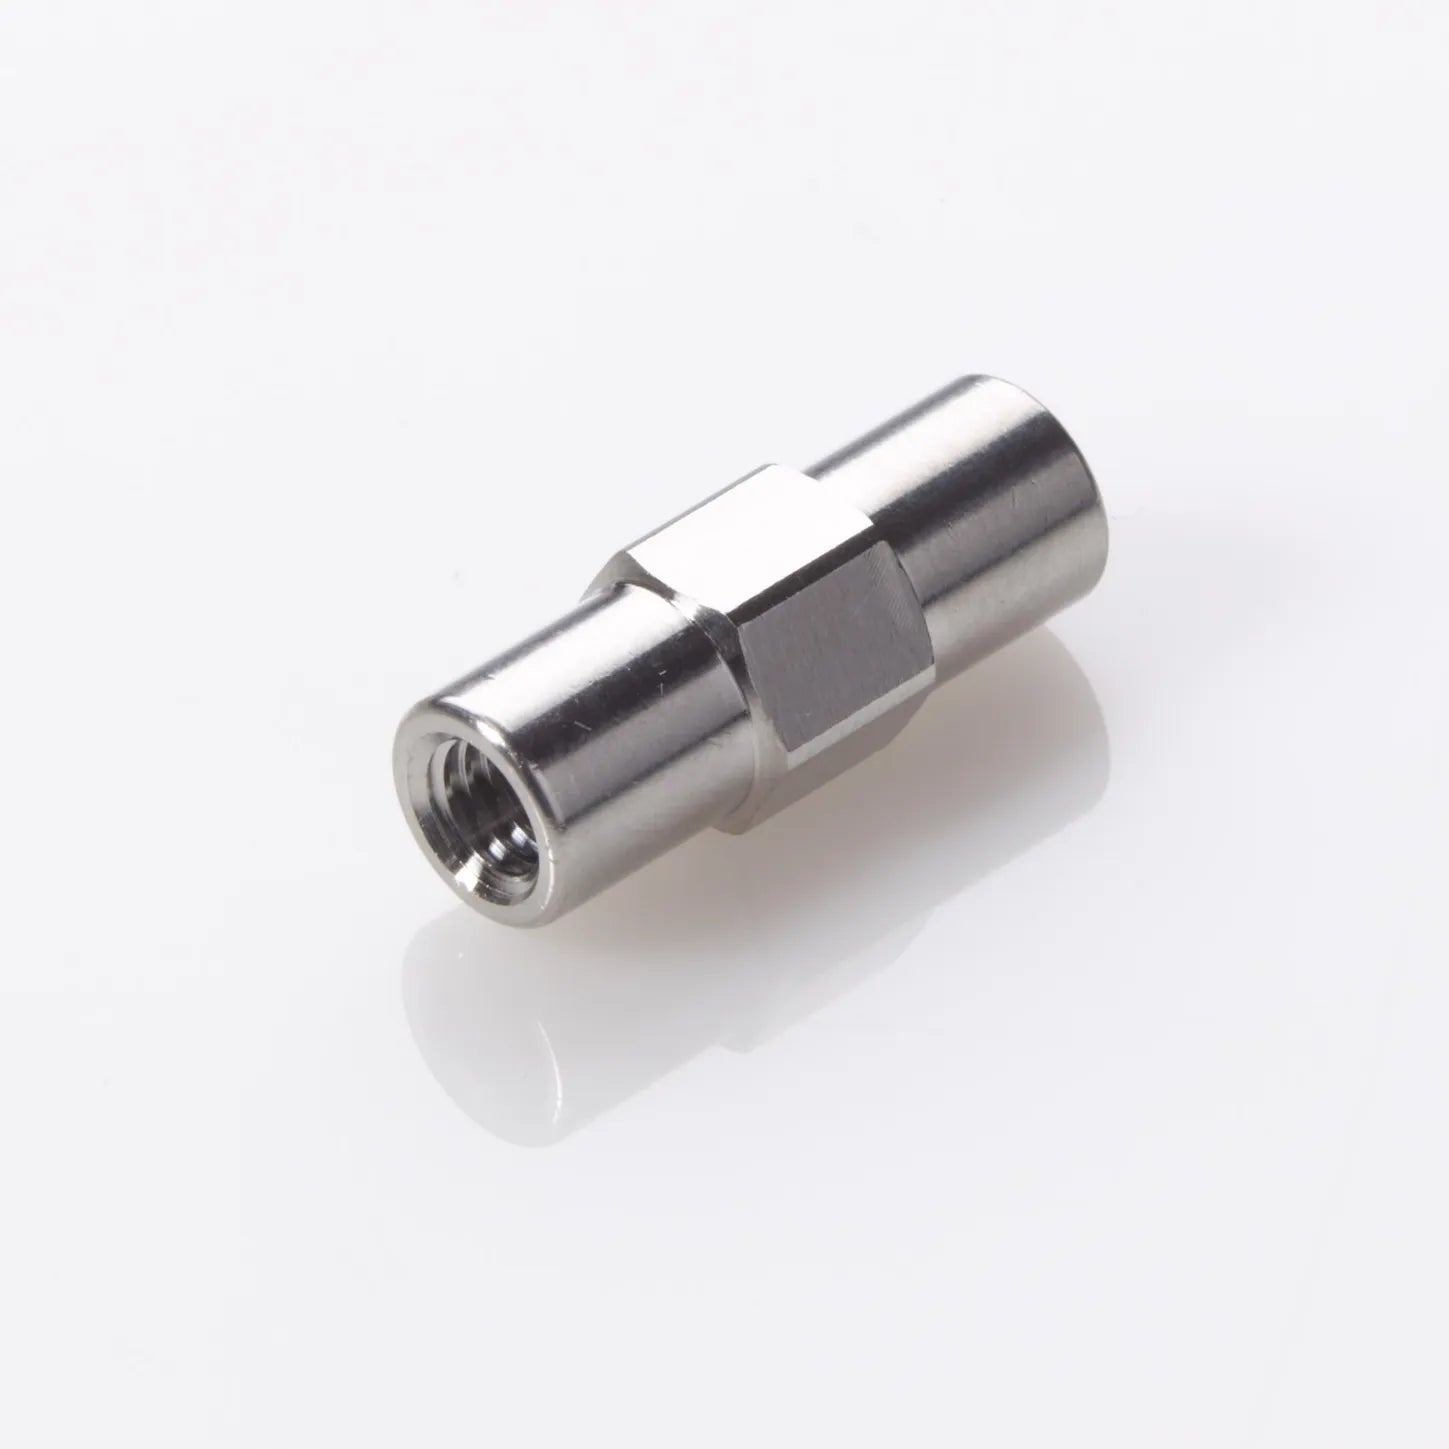 Connector Union ZDV Stainless Steel 0.010" (0.25mm) Thru-Hole for 1/16" OD Tubing (Union Body Only)